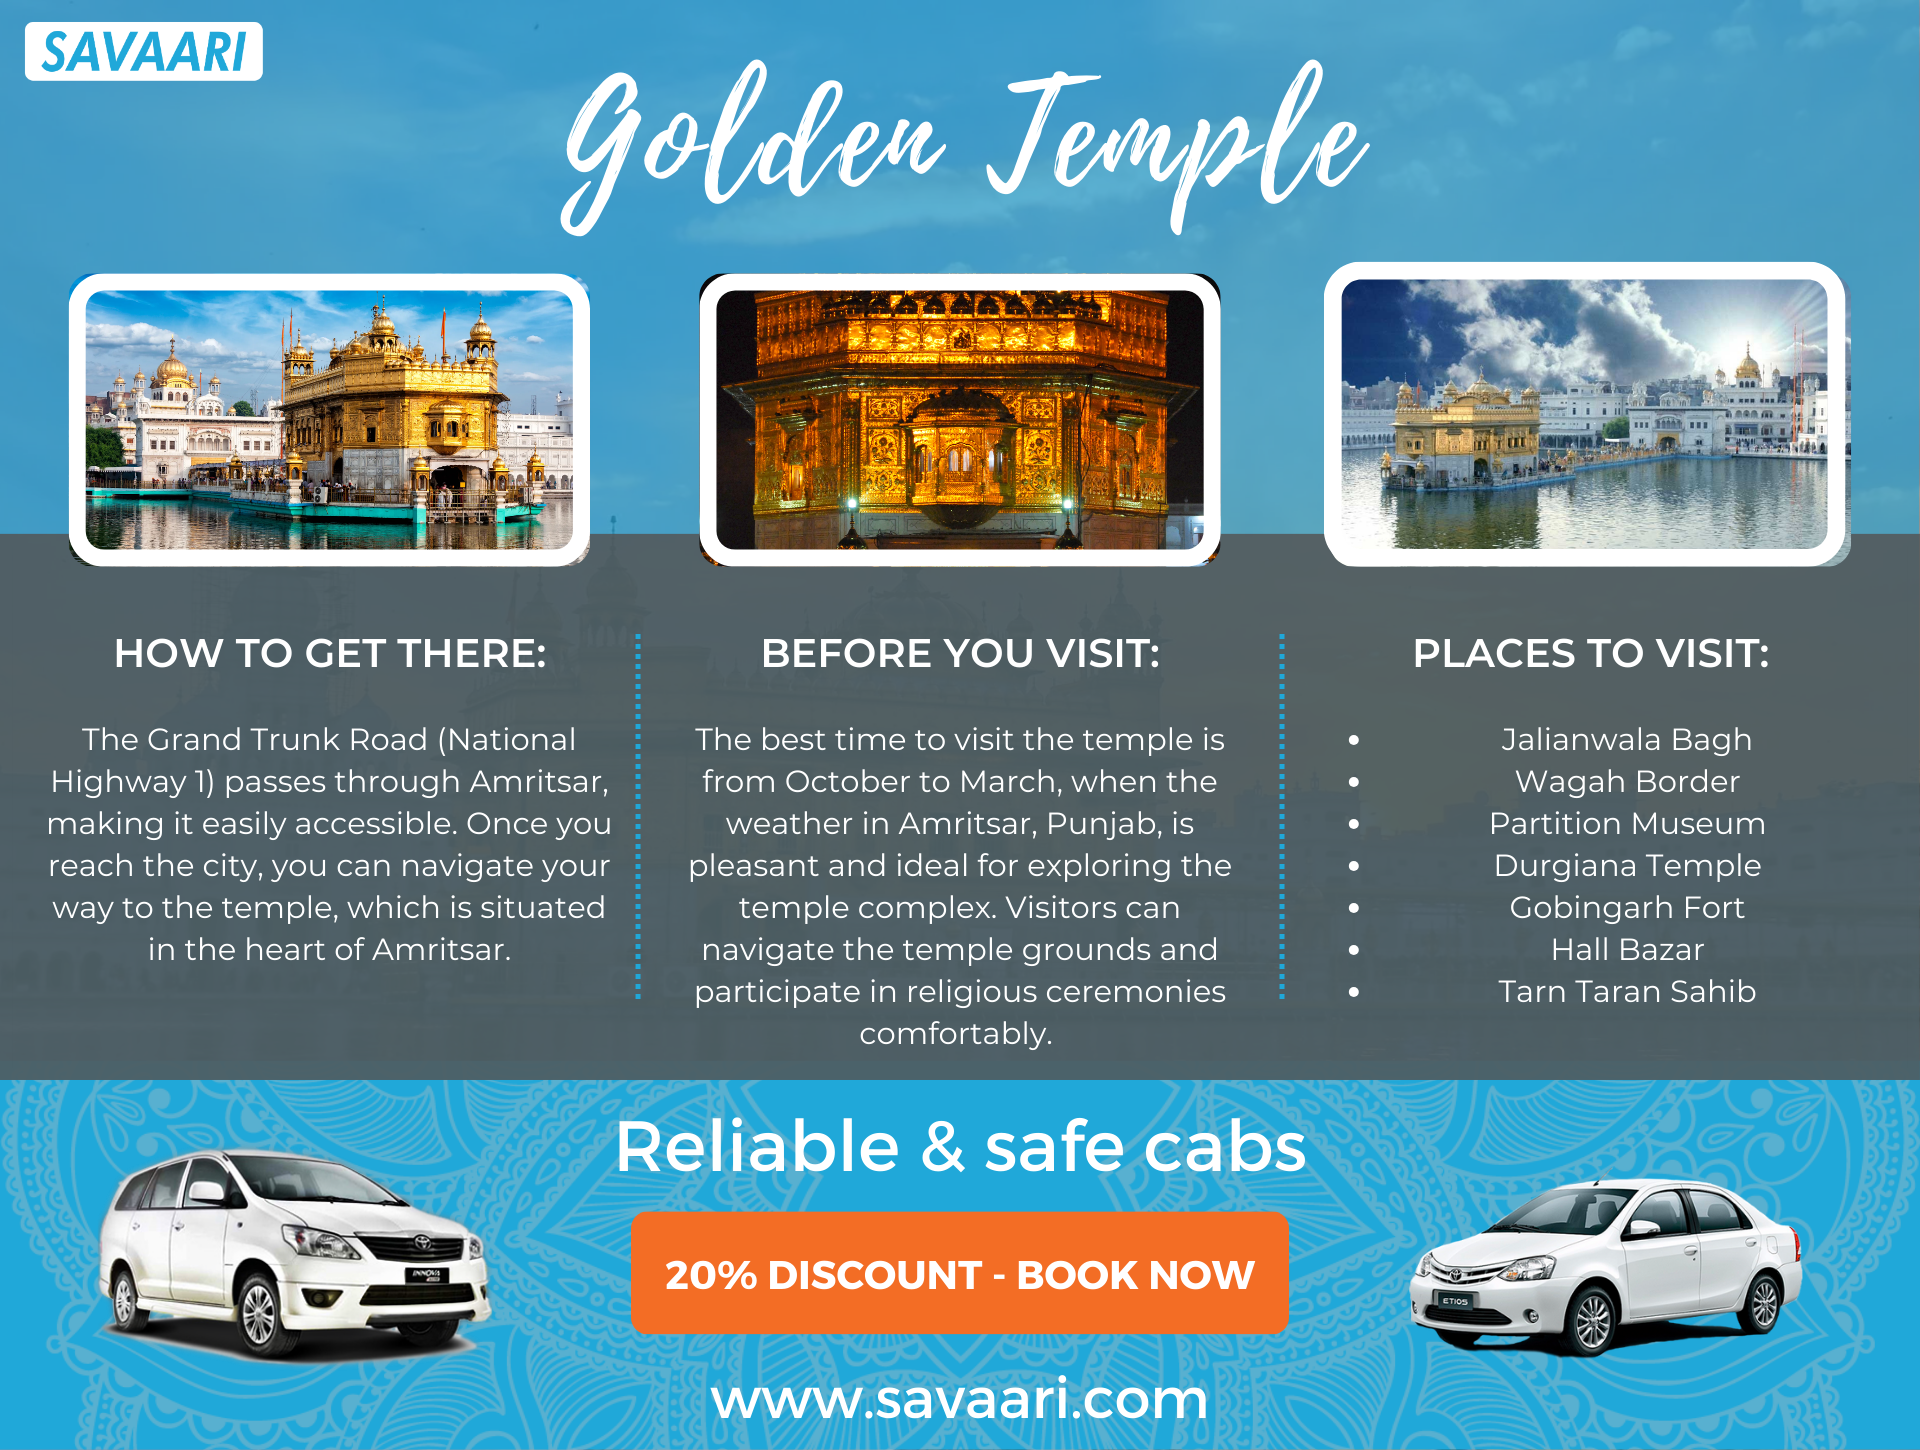 Things to do in Golden Temple